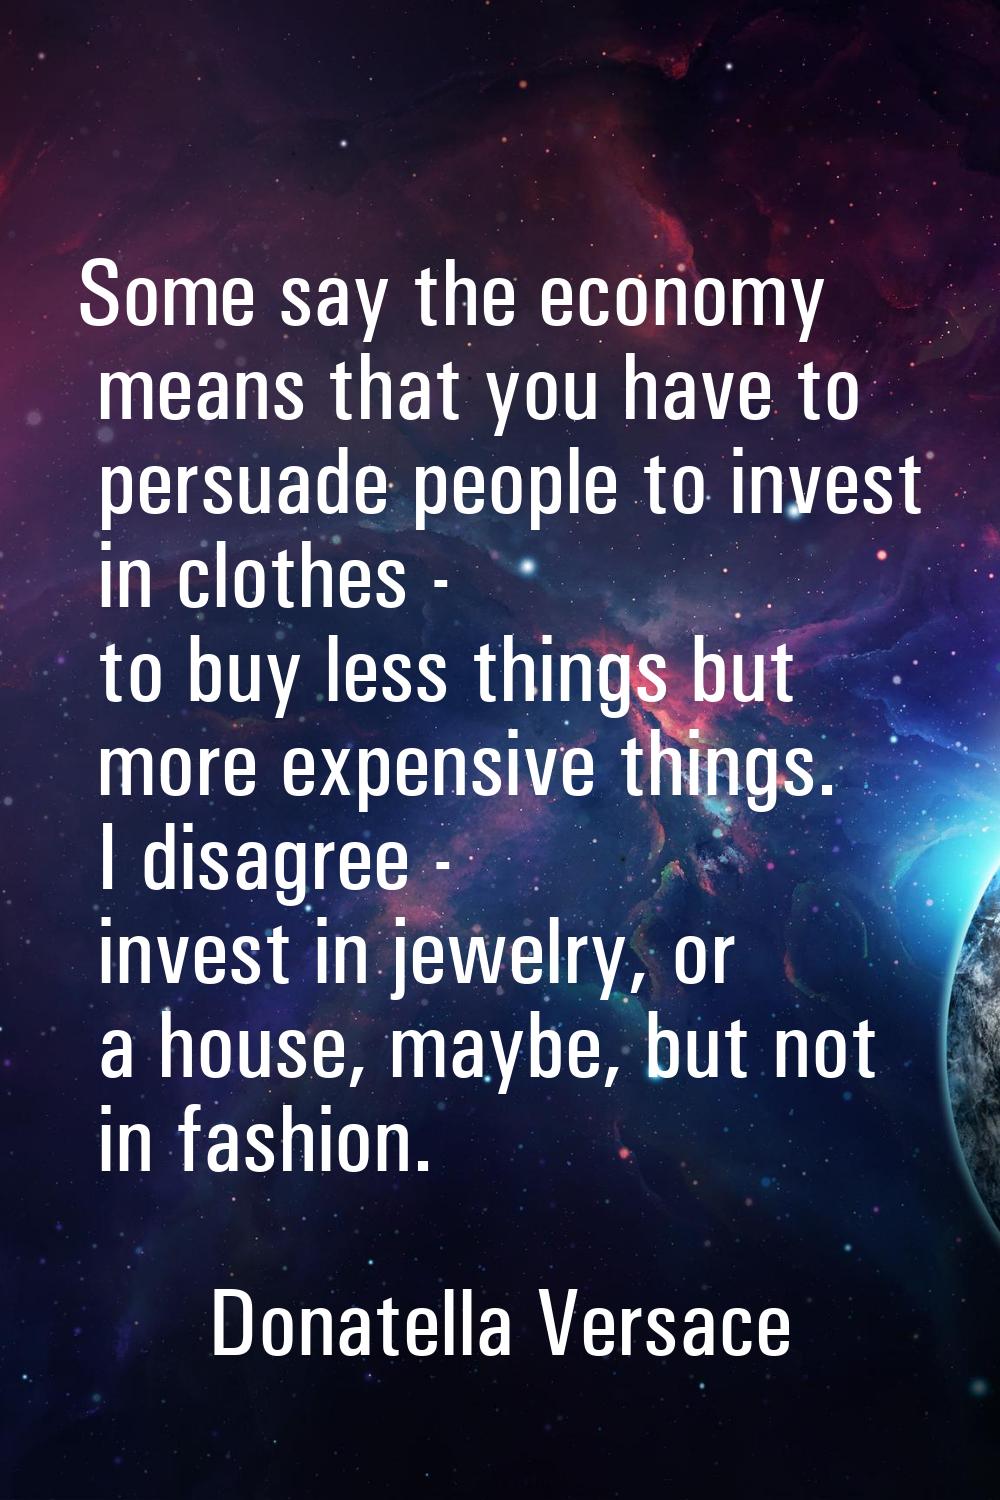 Some say the economy means that you have to persuade people to invest in clothes - to buy less thin